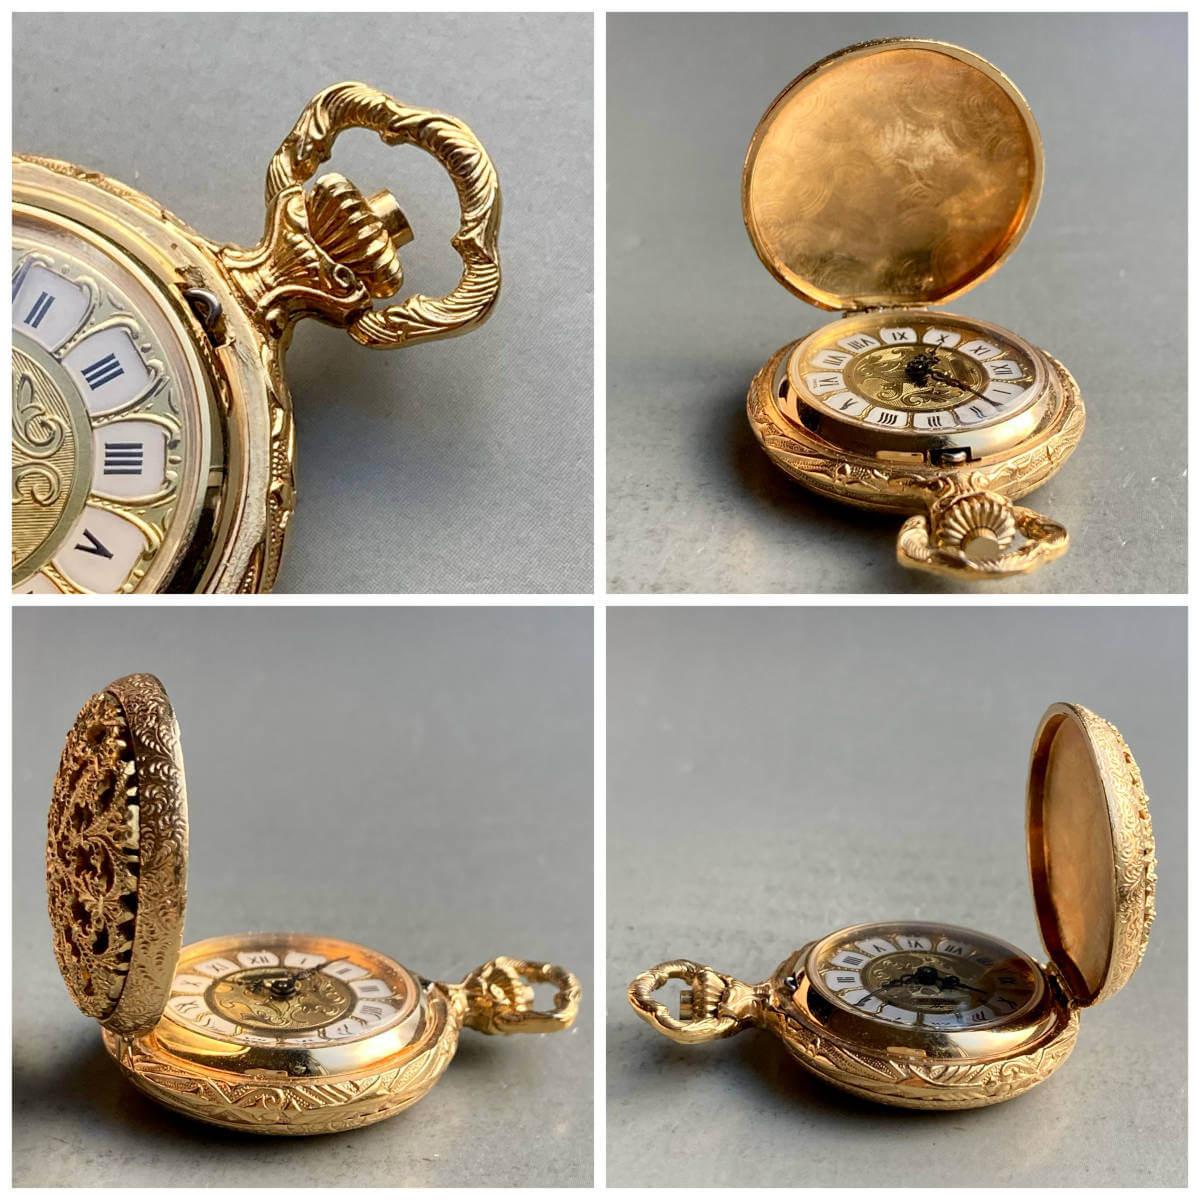 Edox Pocket Watch Antique Modified Gold Case 28mm Vintage - Murphy Johnson Watches Co.